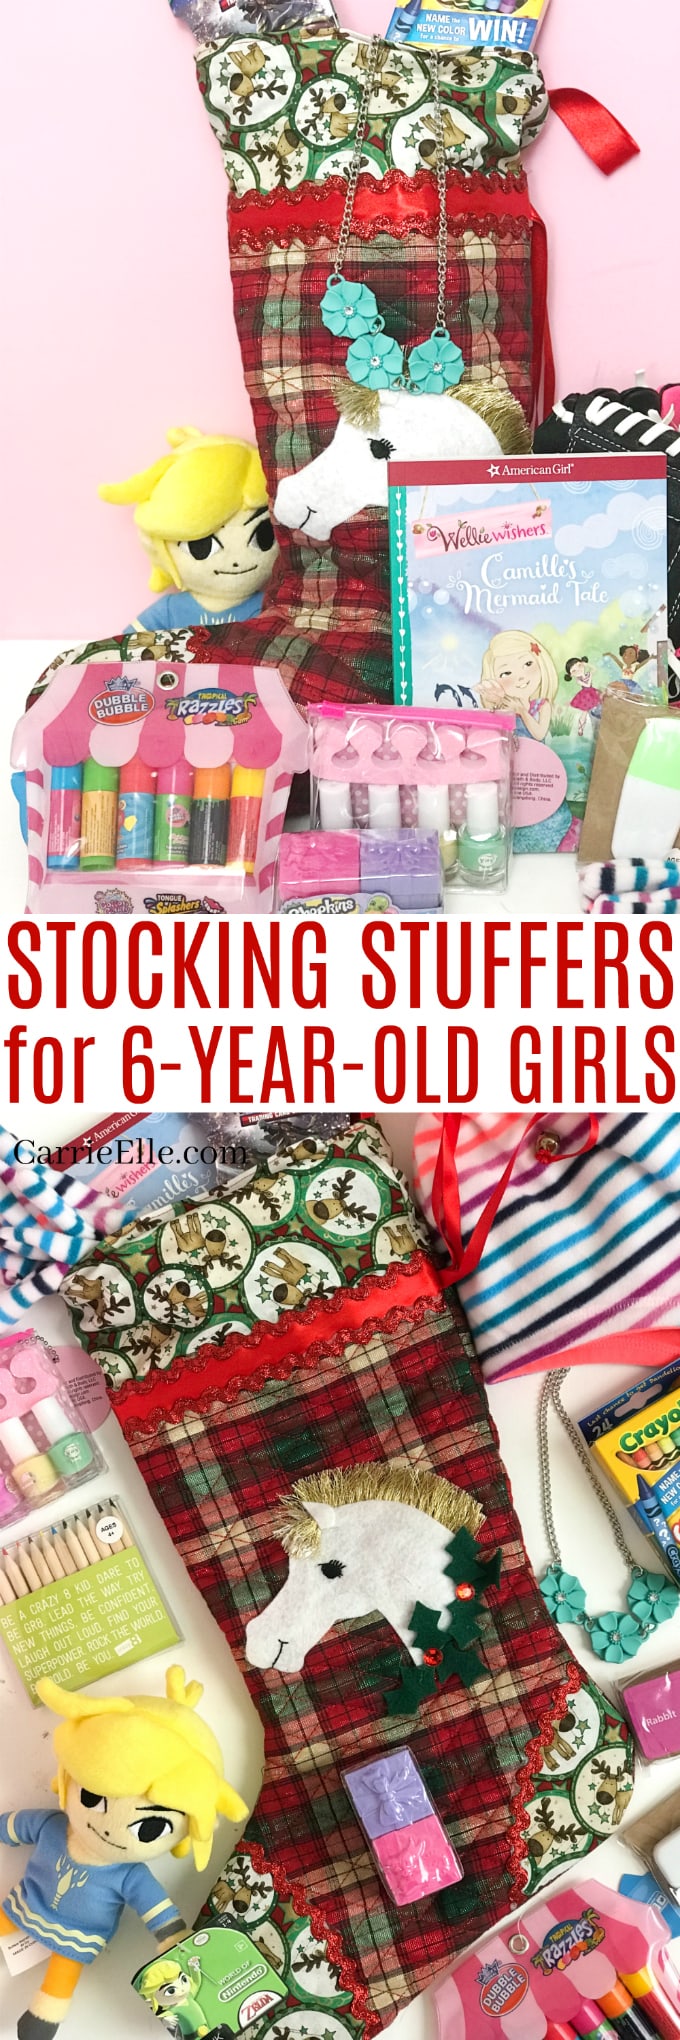 Stocking Stuffers for 6 year old girls